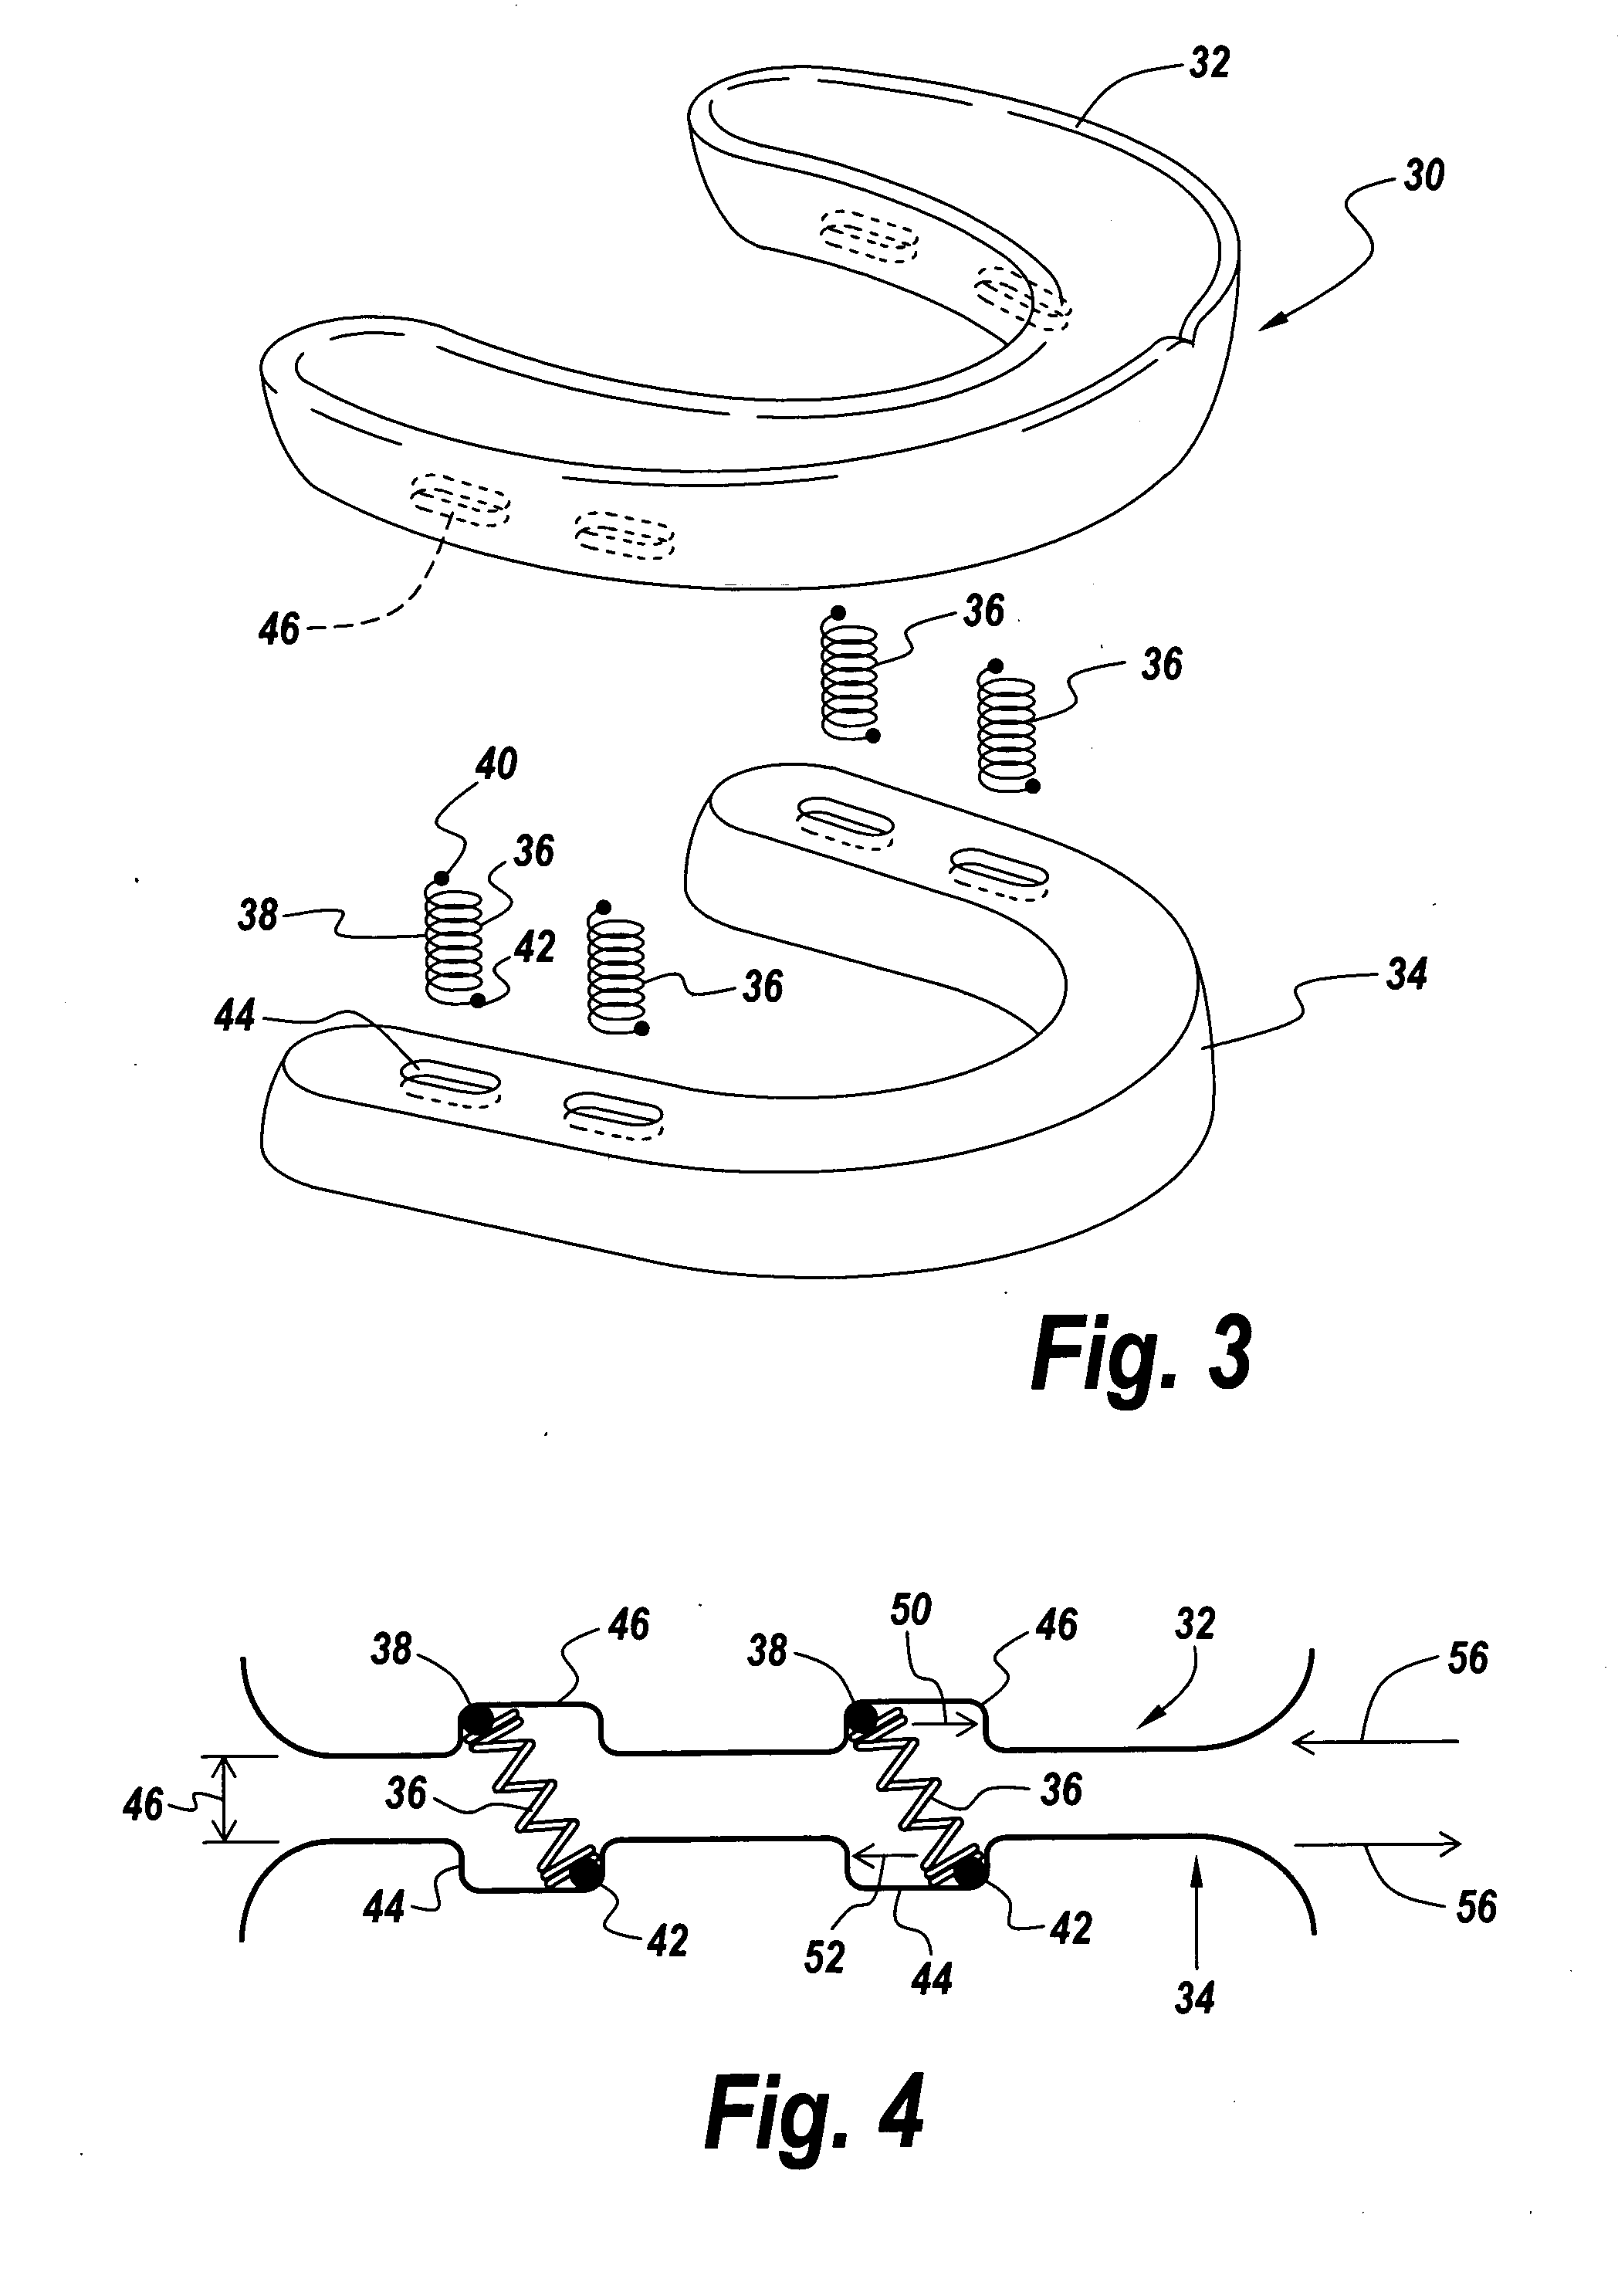 Method and apparatus for protecting teeth, preventing the effects of bruxism and protecting oral structures from sports injuries